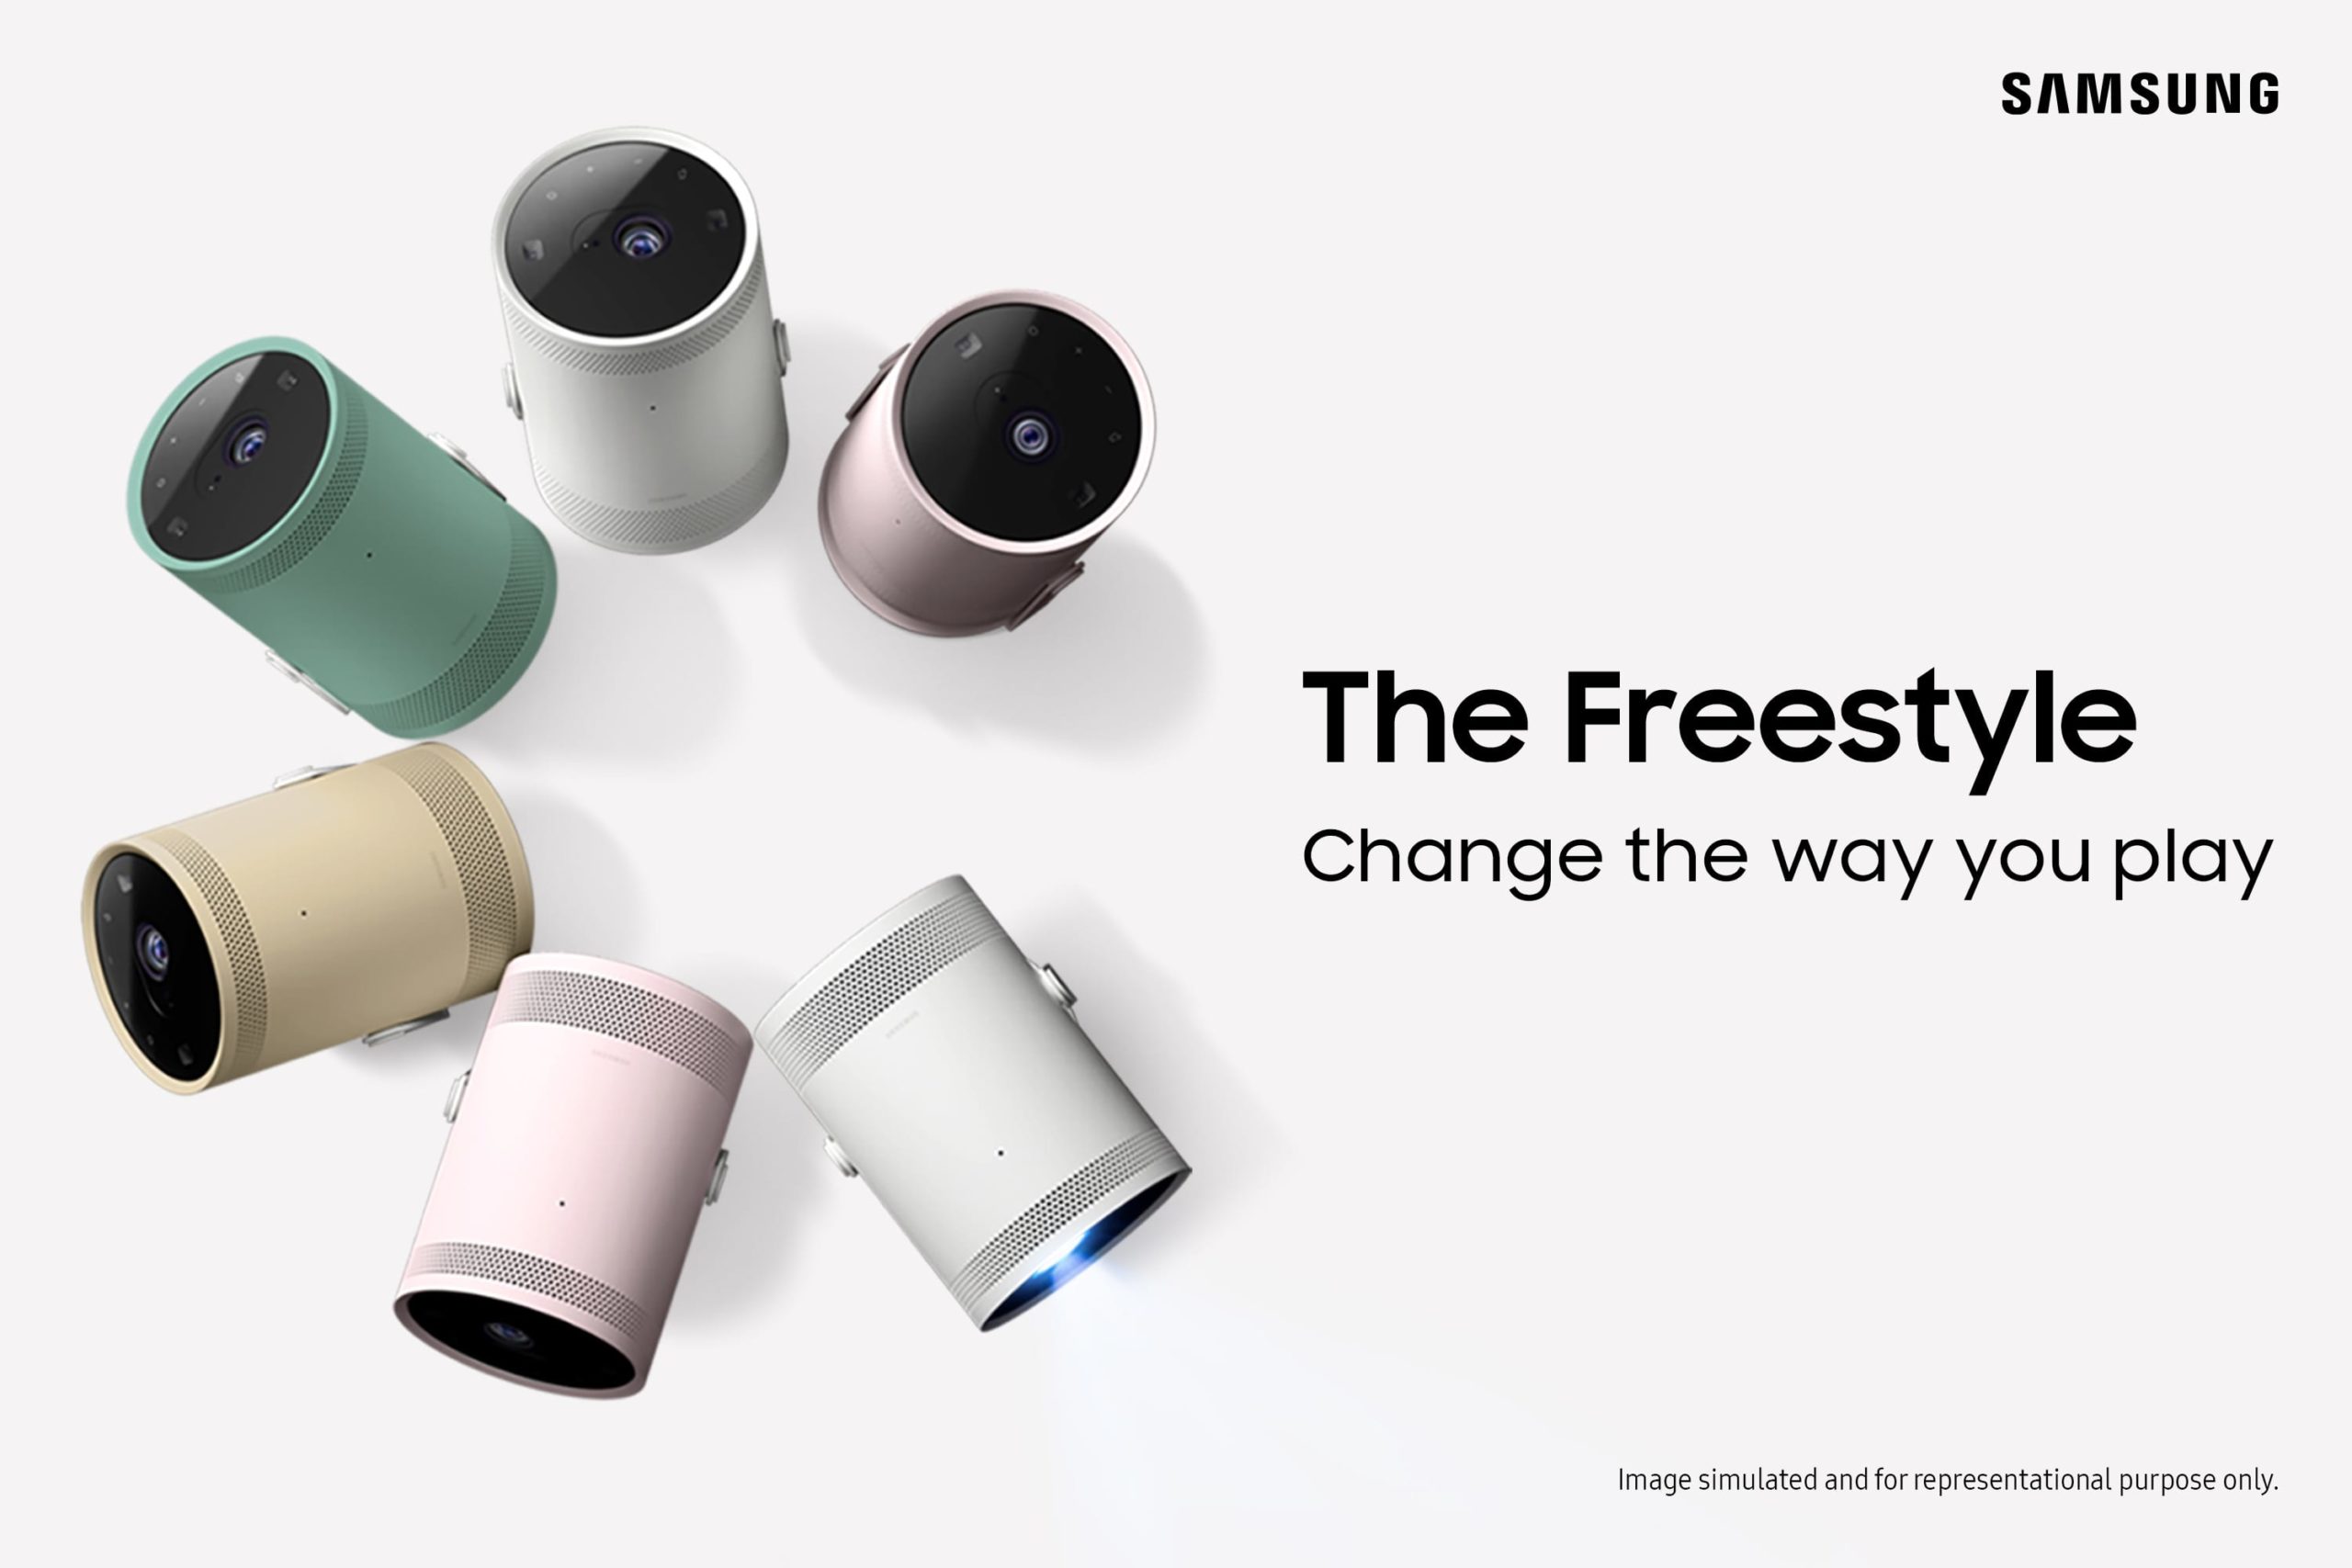 The Samsung Freestyle Projector slash Television Replacement is now available for Pre-Order in Kenya starting at KES 139,995.